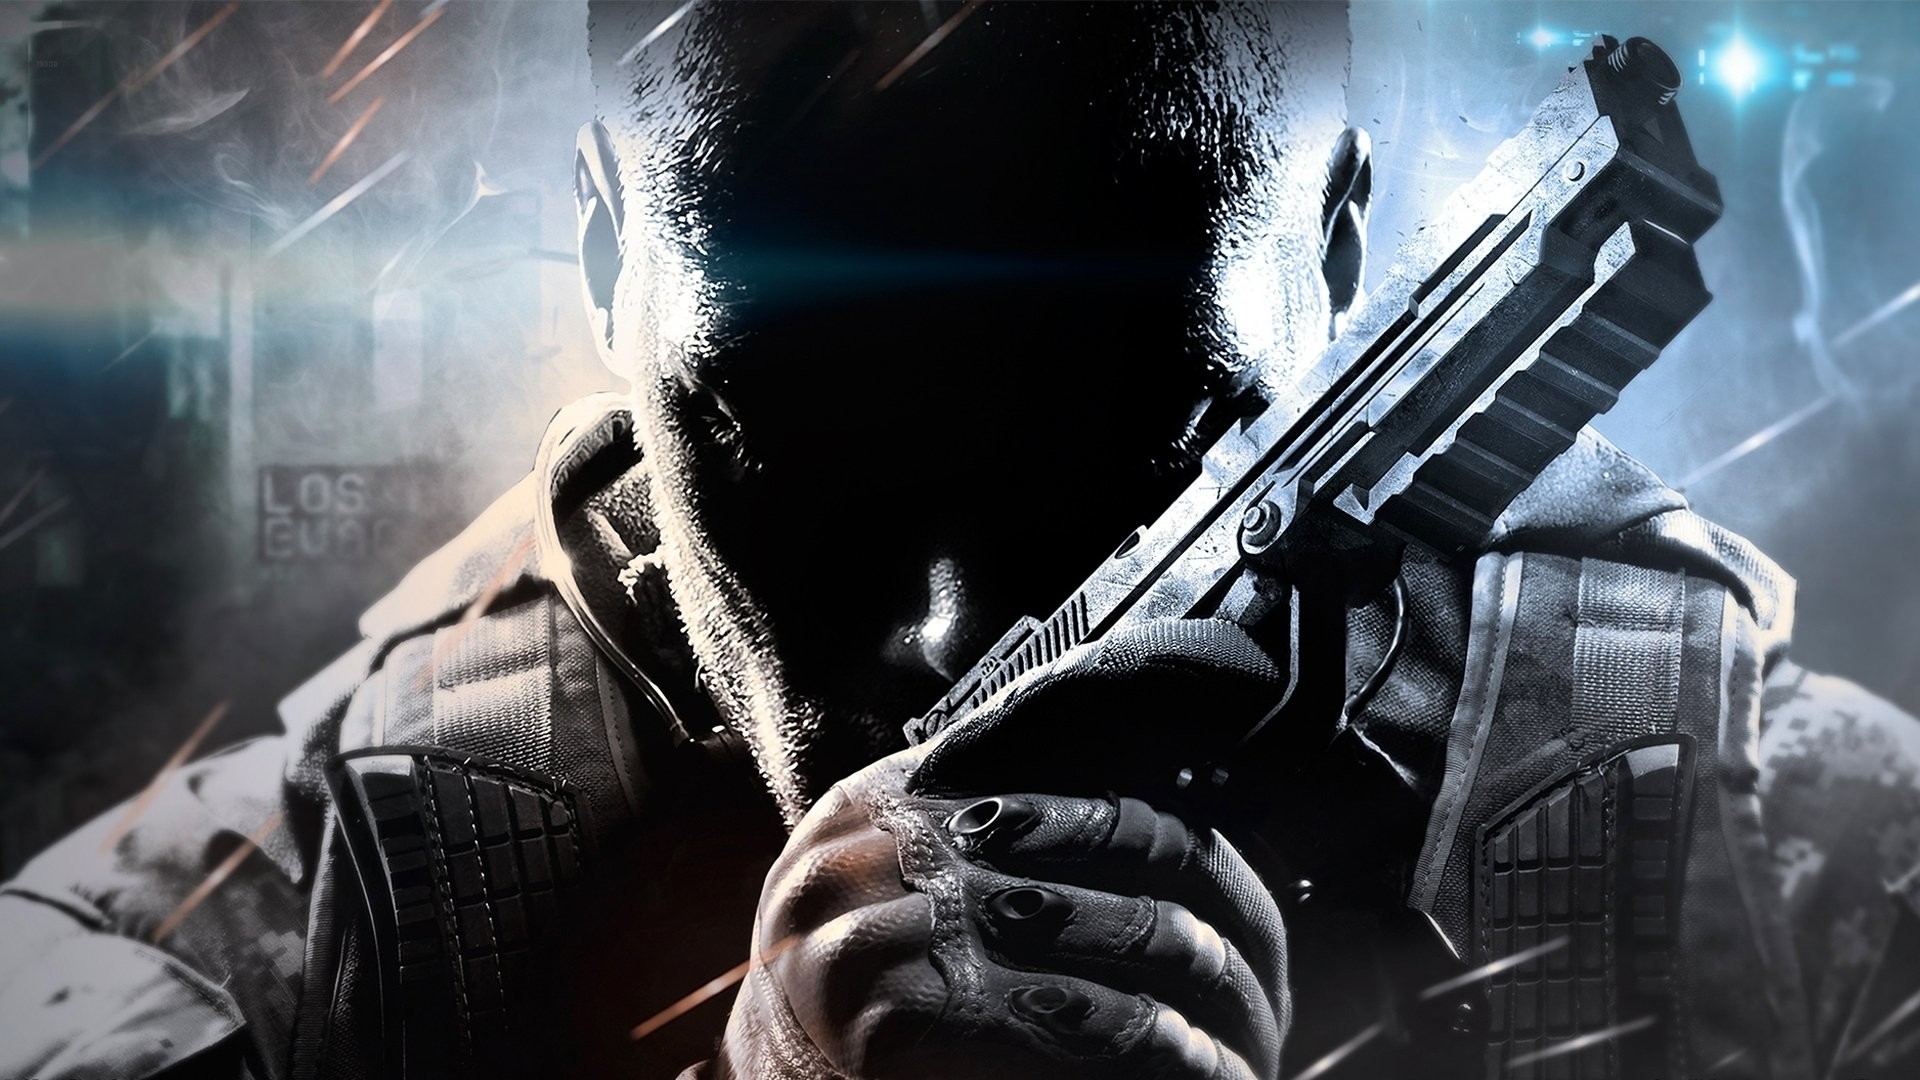 Black Ops Backgrounds 69 pictures